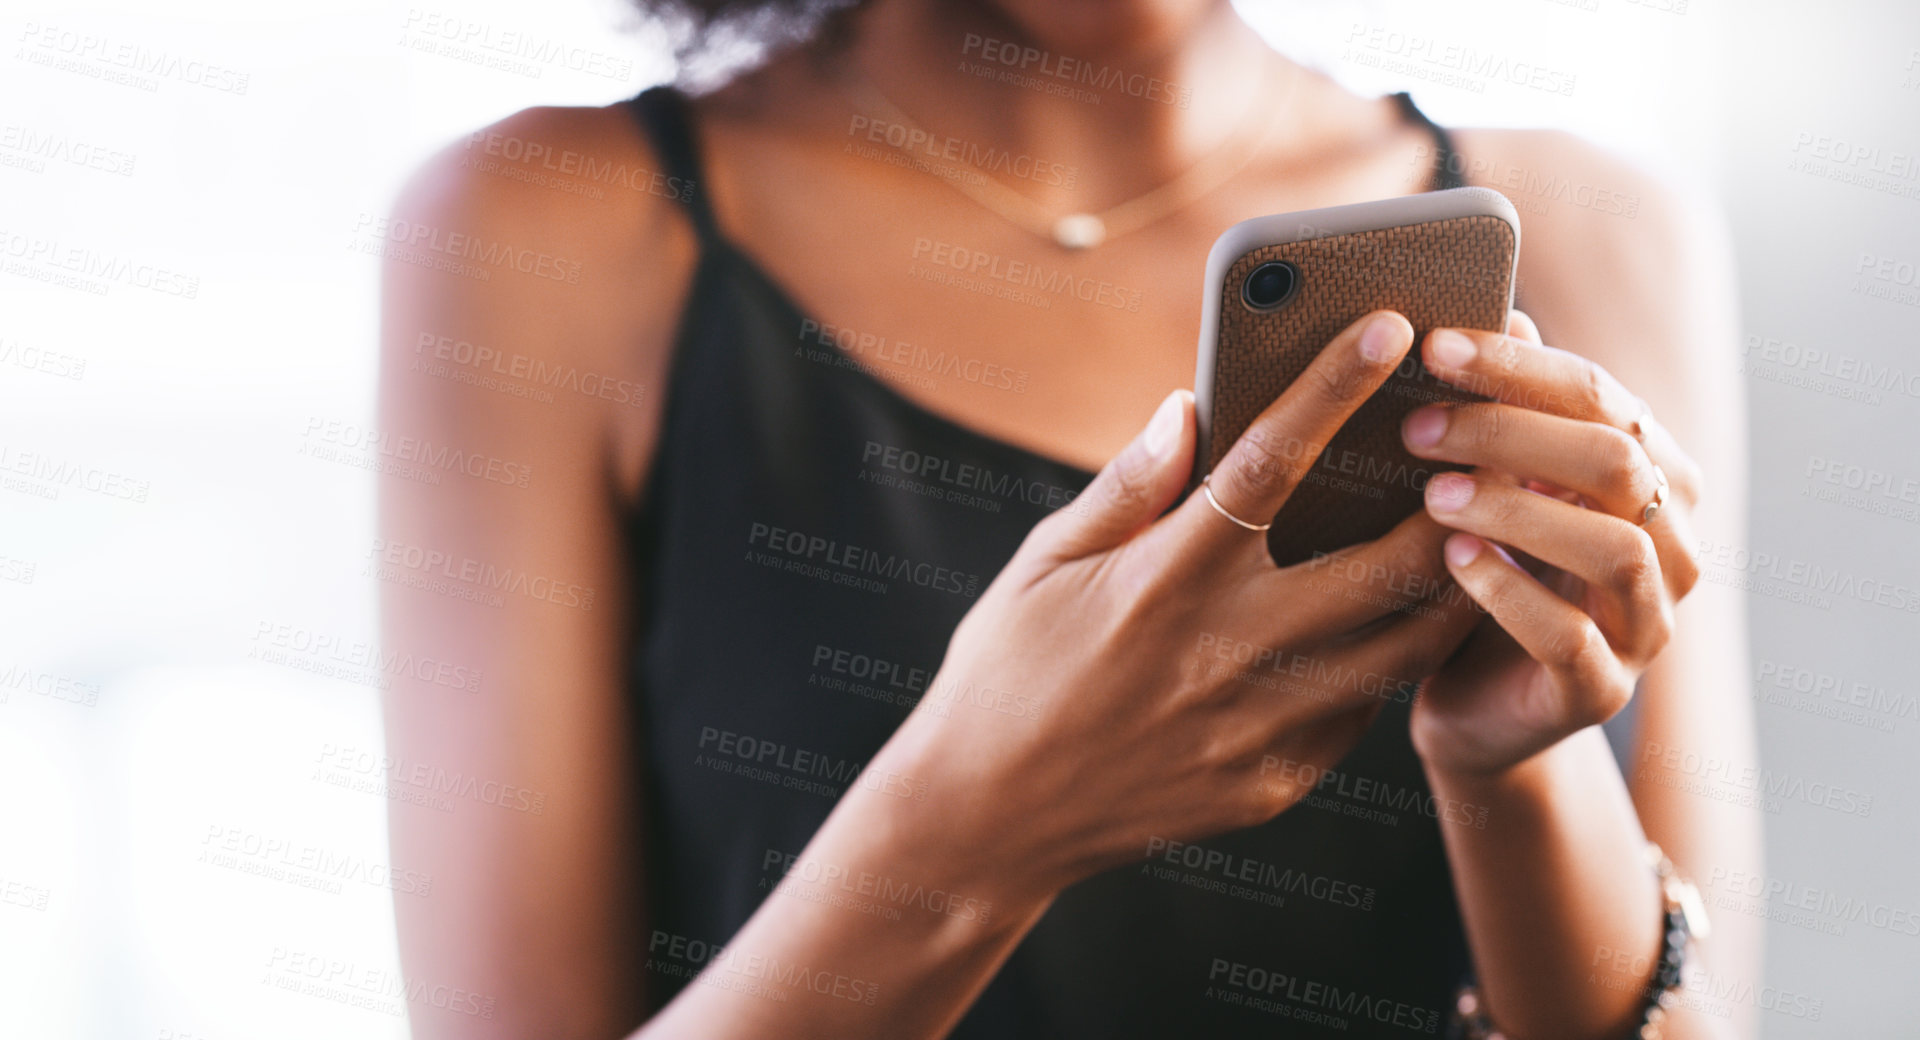 Buy stock photo Cropped shot of a woman using a smartphone